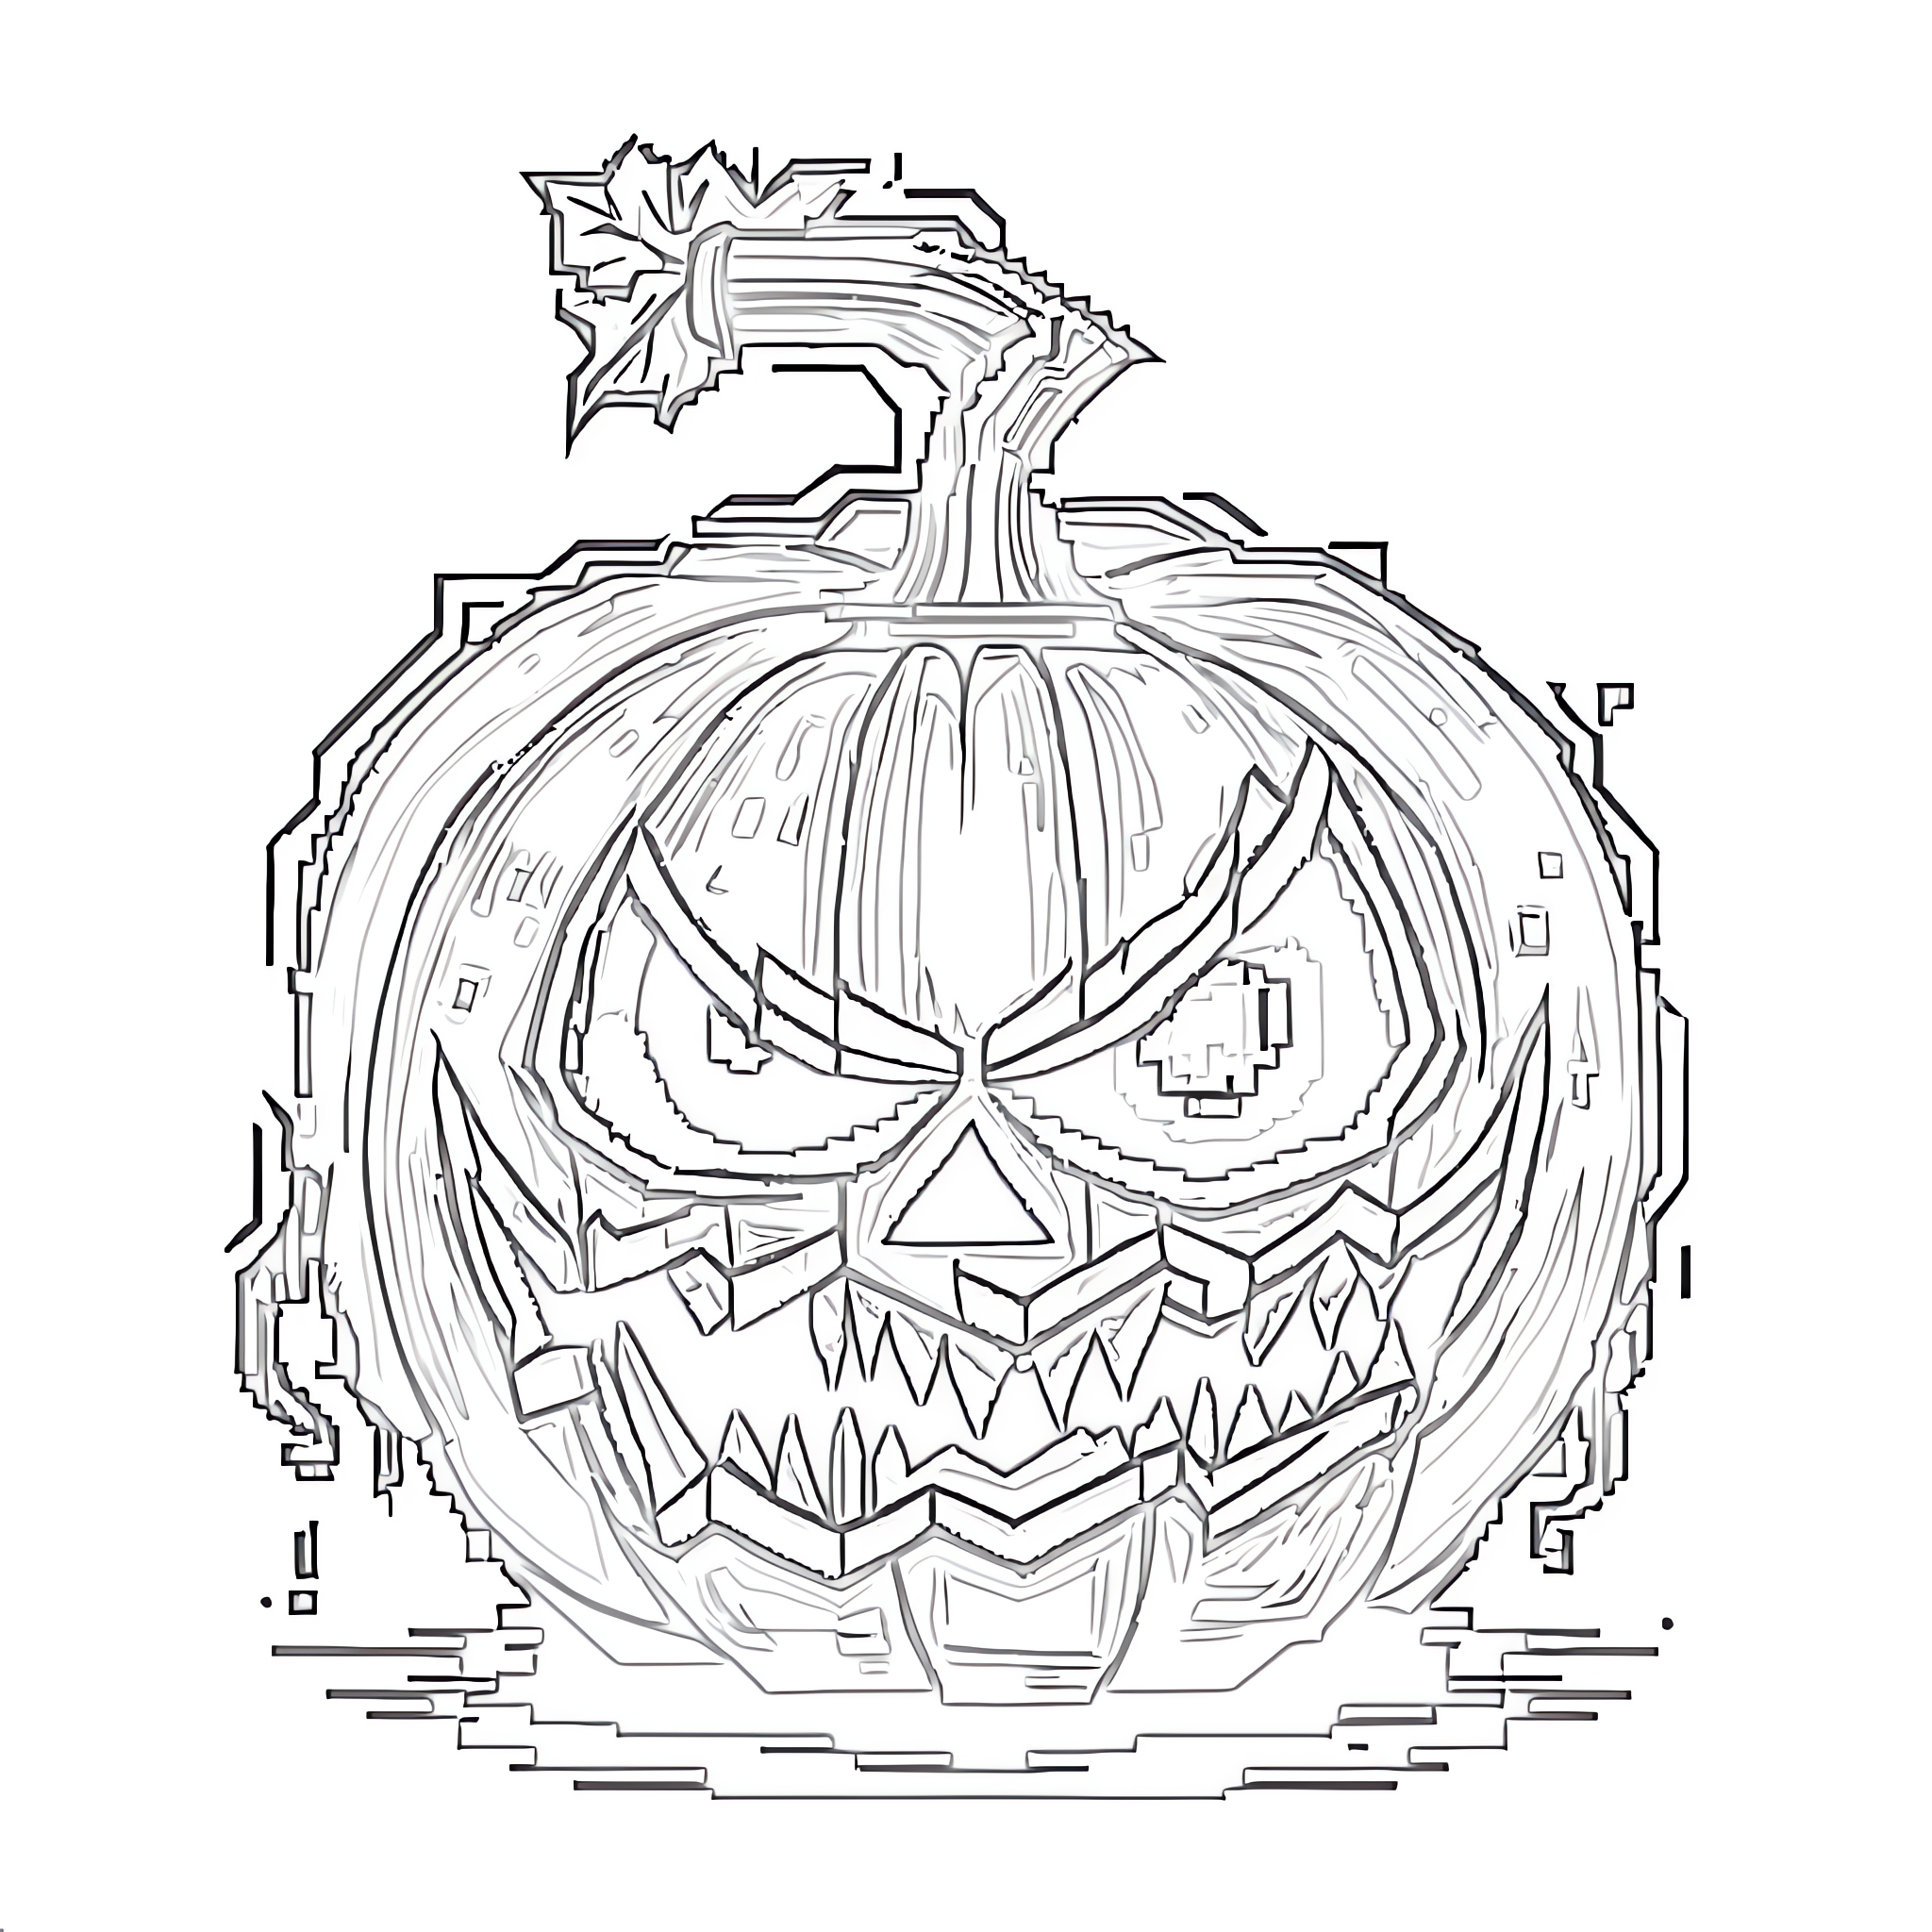 Printable scary pumpkin coloring page